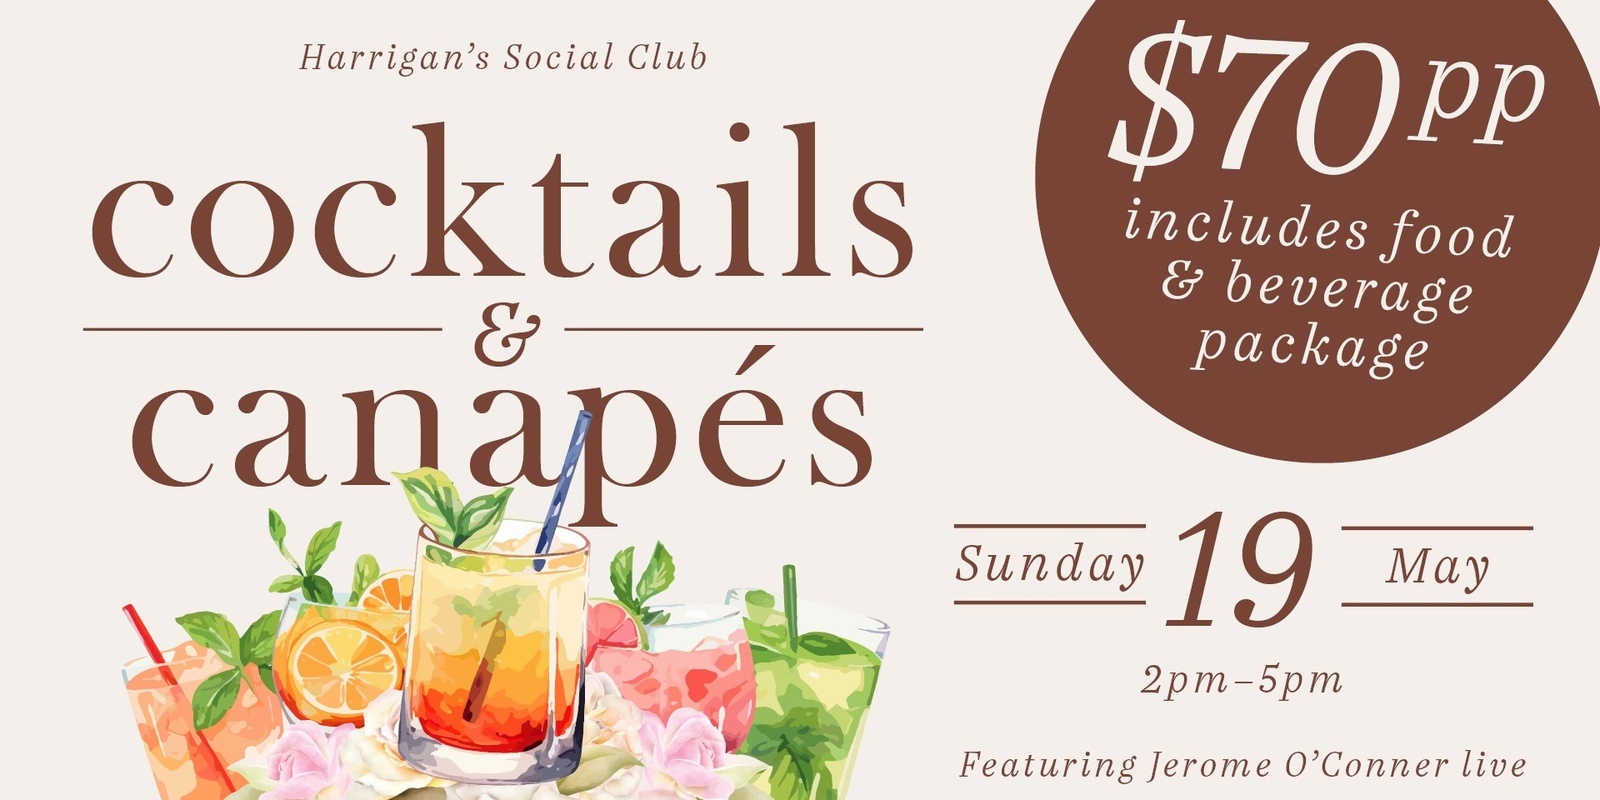 Banner image for Cocktails & Canapes